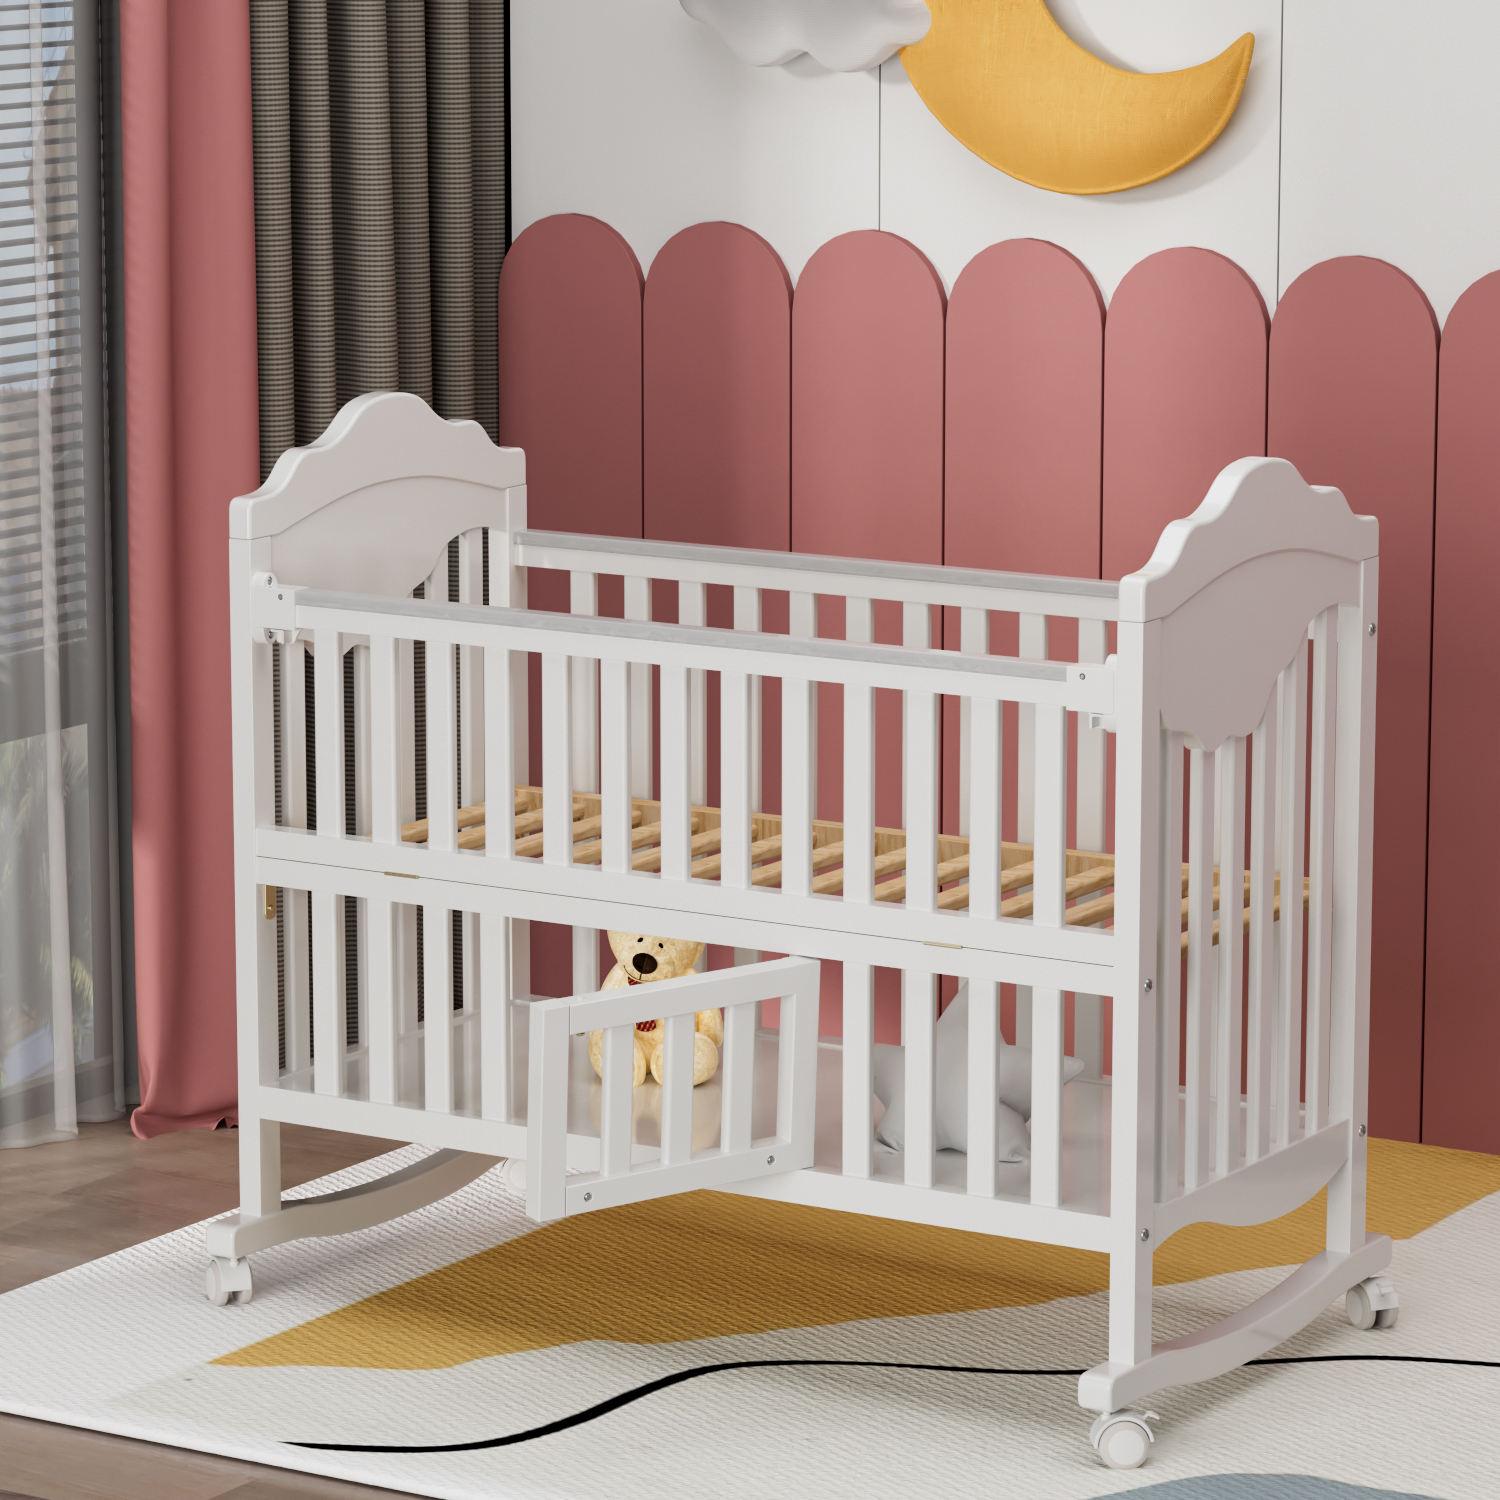 New High Quality Safe Wooden Baby Crib-04